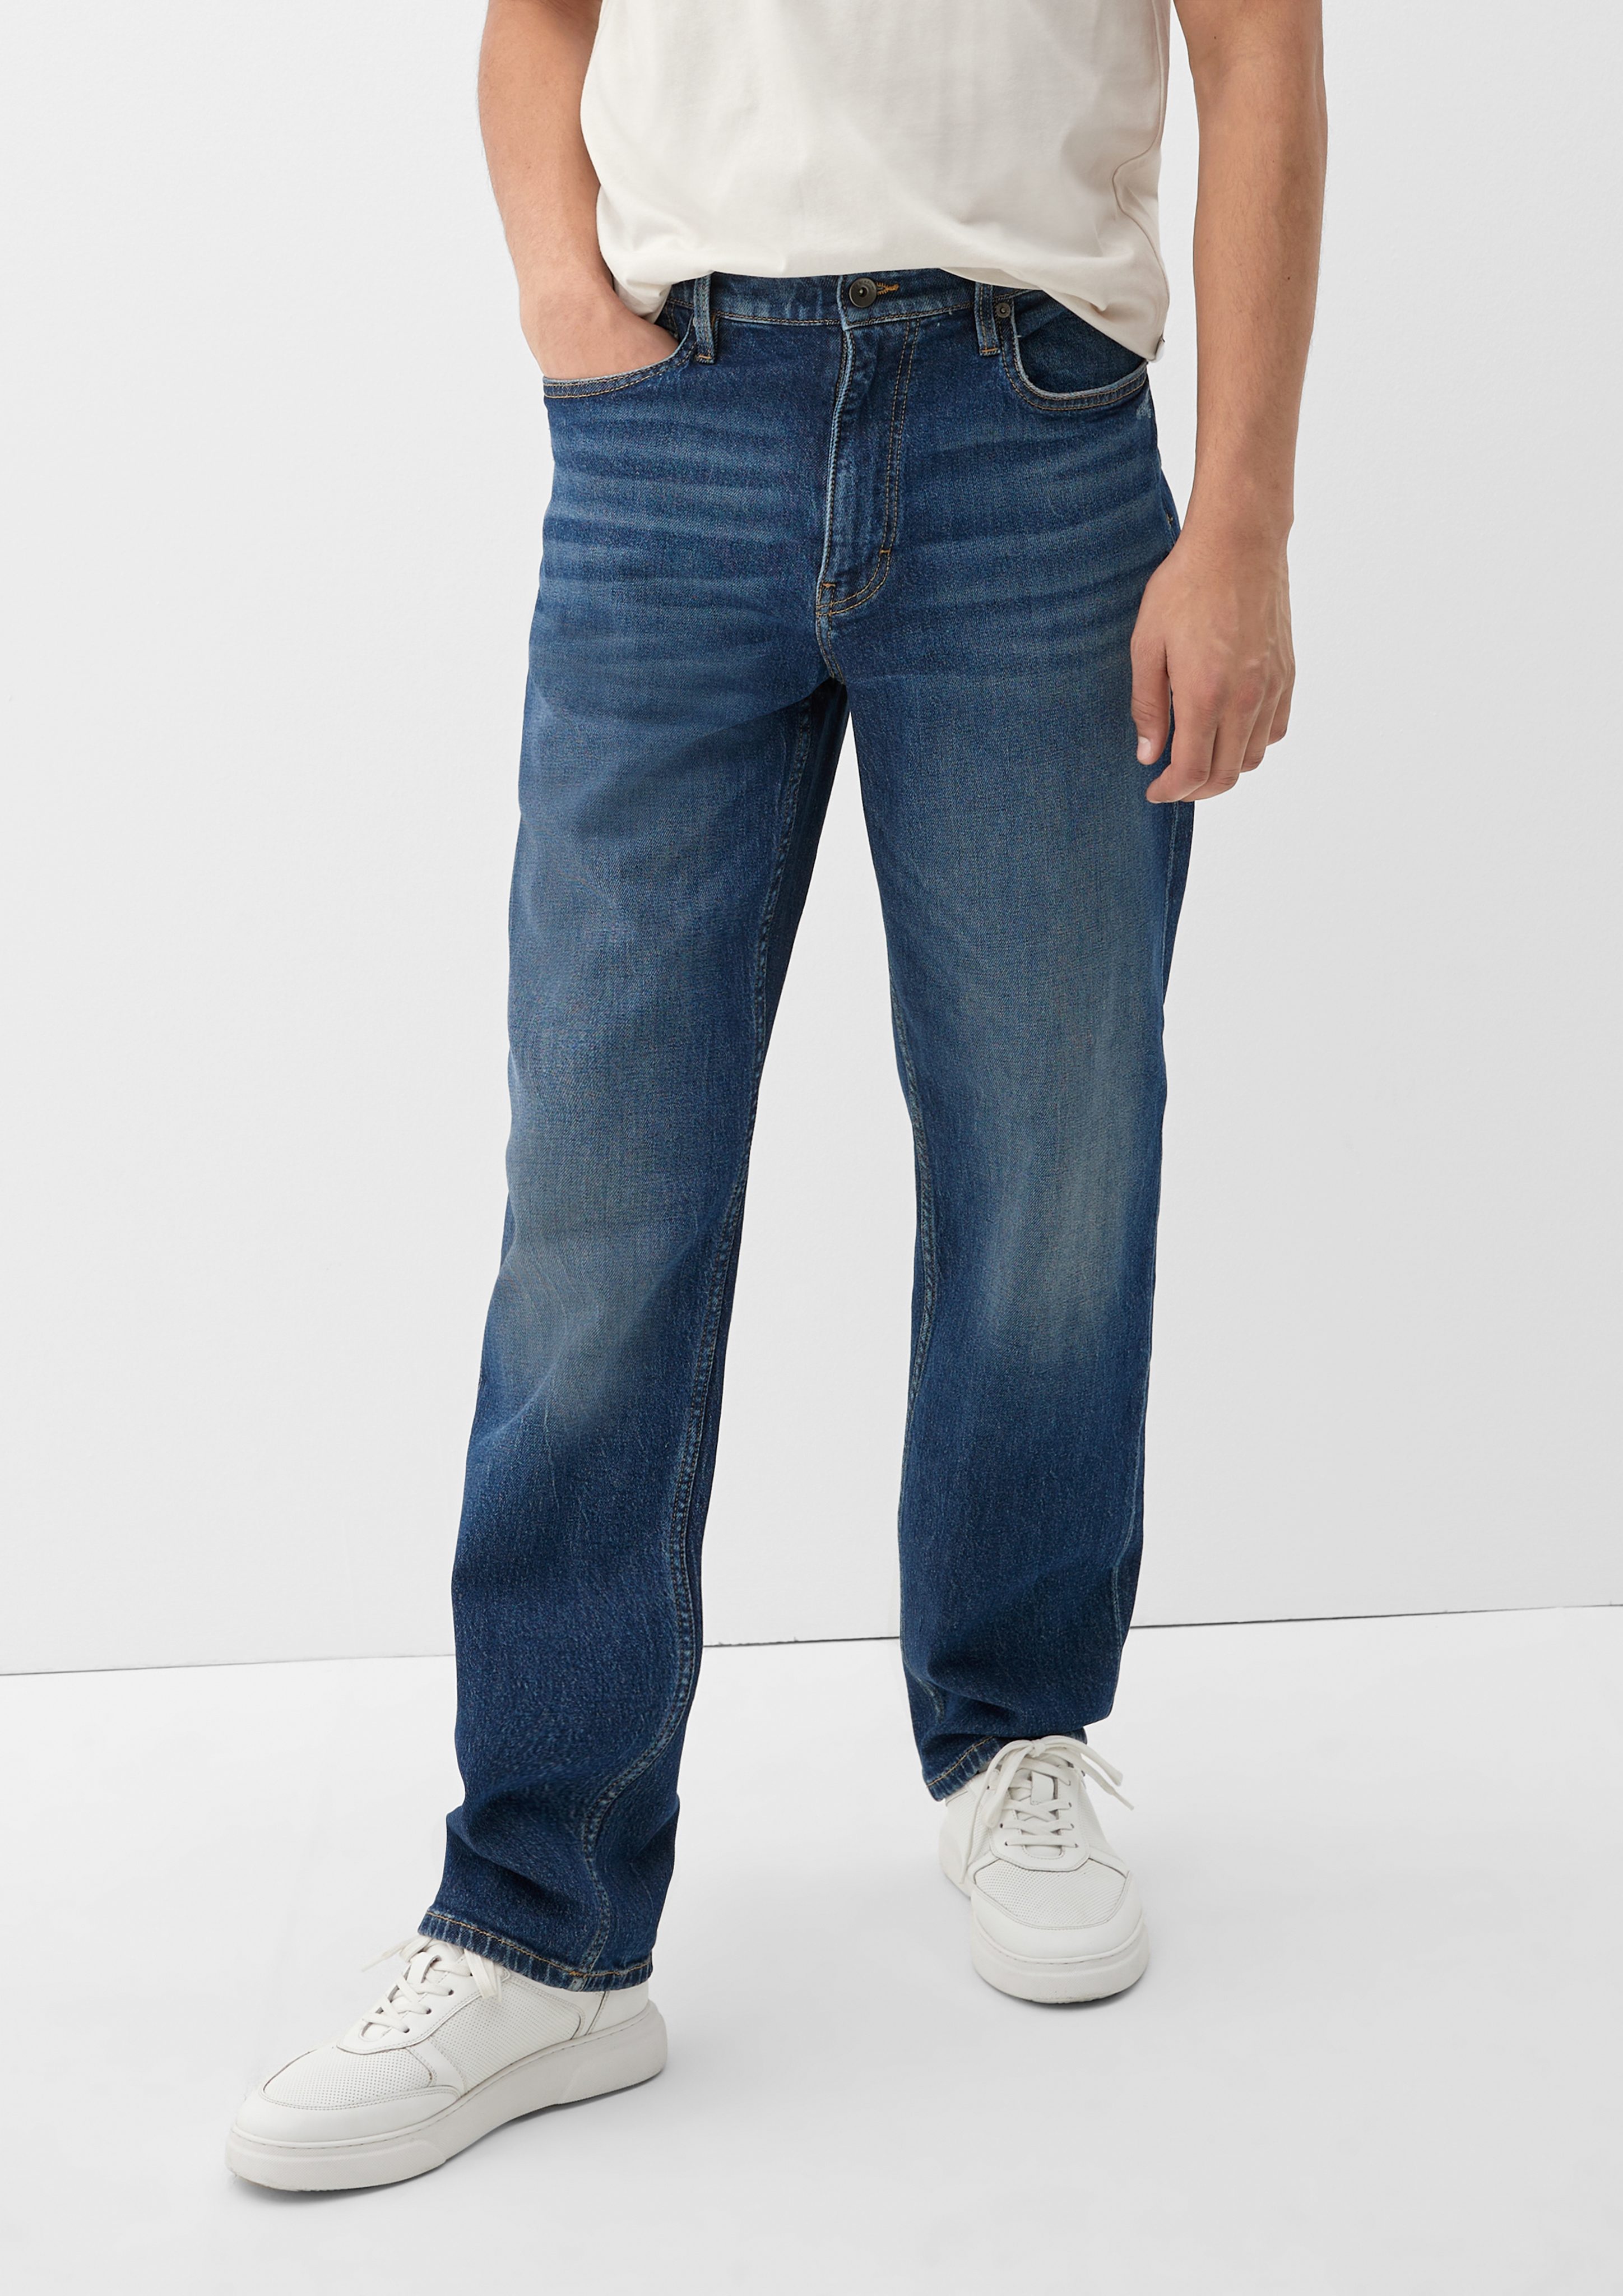 mit Stoffhose Loose: Jeans QS Waschung Used-Waschung